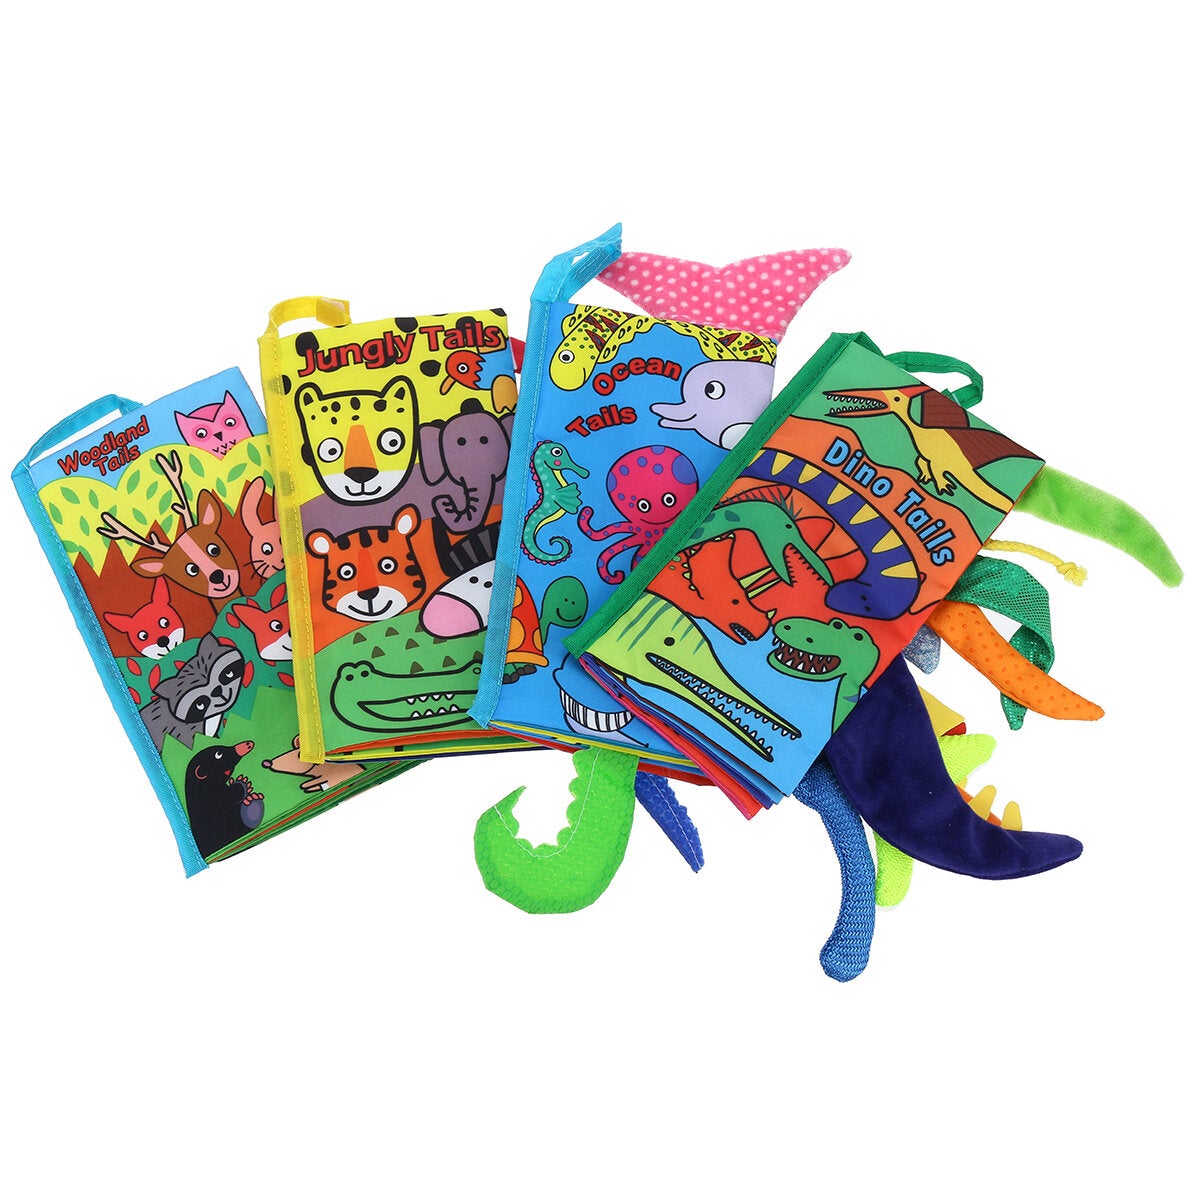 Colorful Three-dimensional Washable Soft Cloth Book Built-in Sound Paper Early Education Toy for Kids Gift